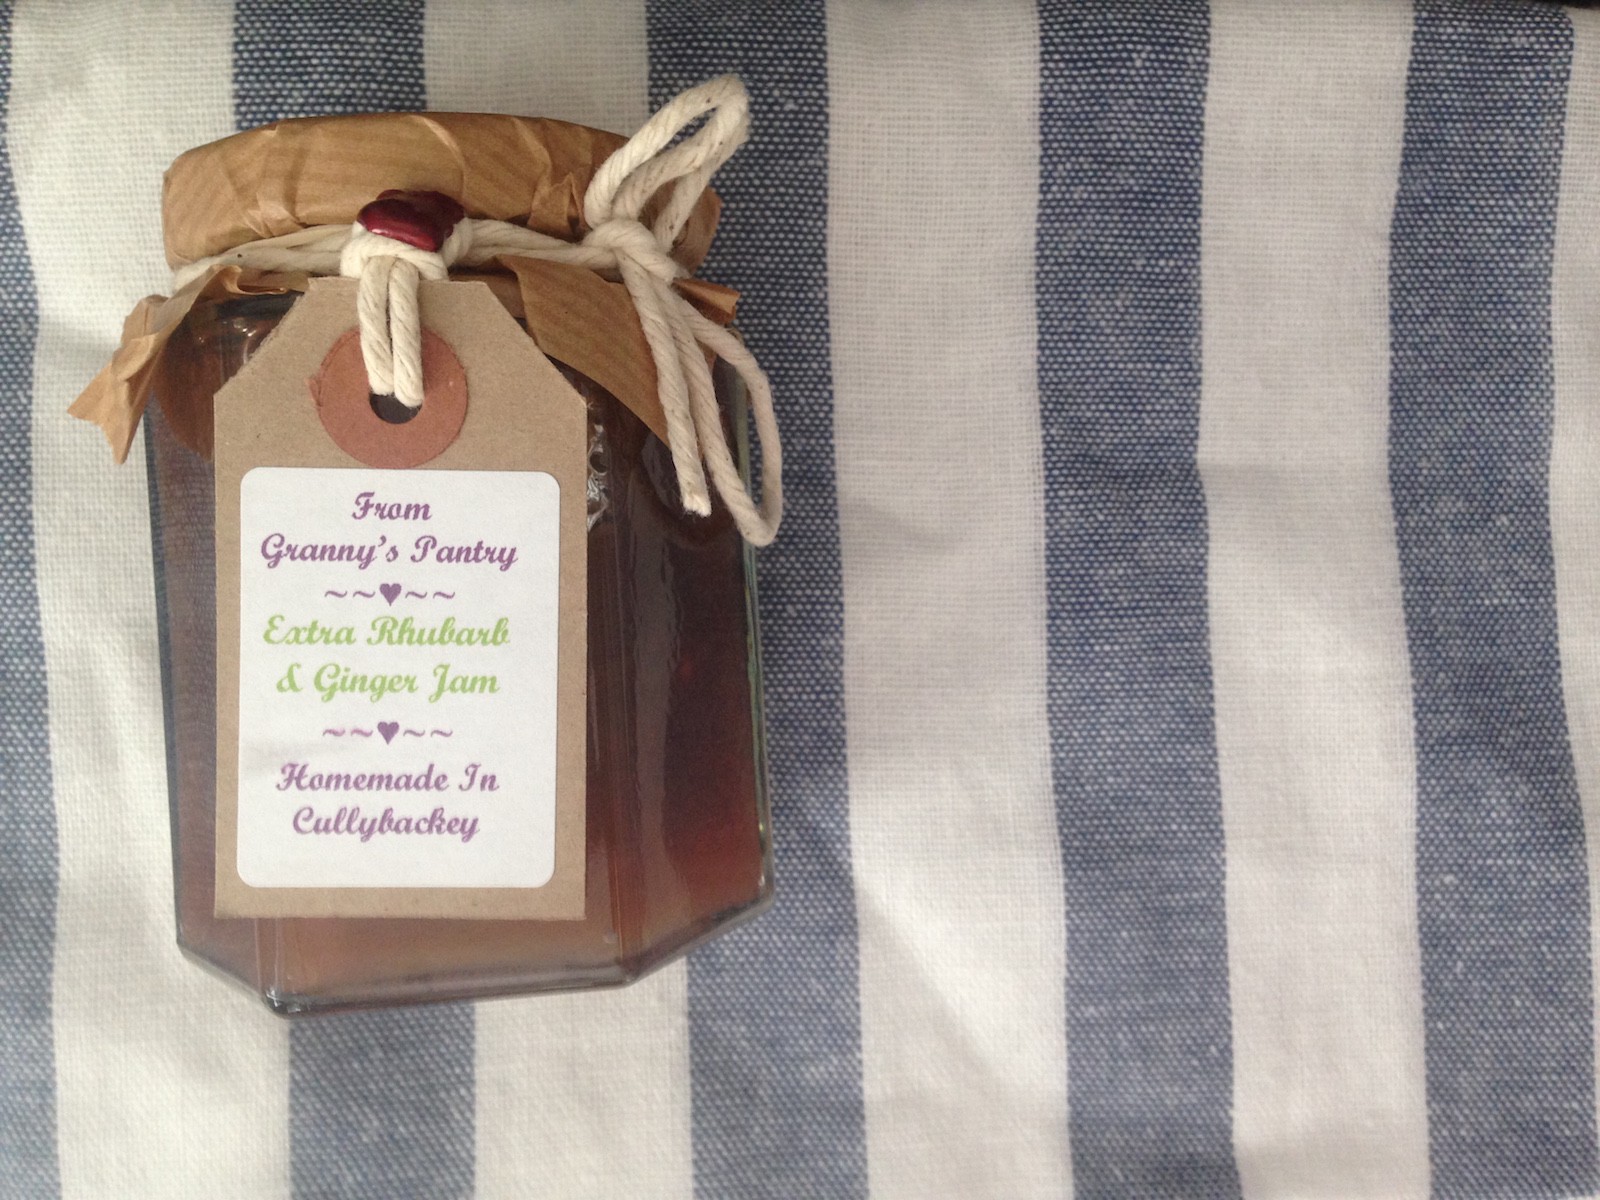 From Grannys Pantry – Rhubarb and Ginger Jam